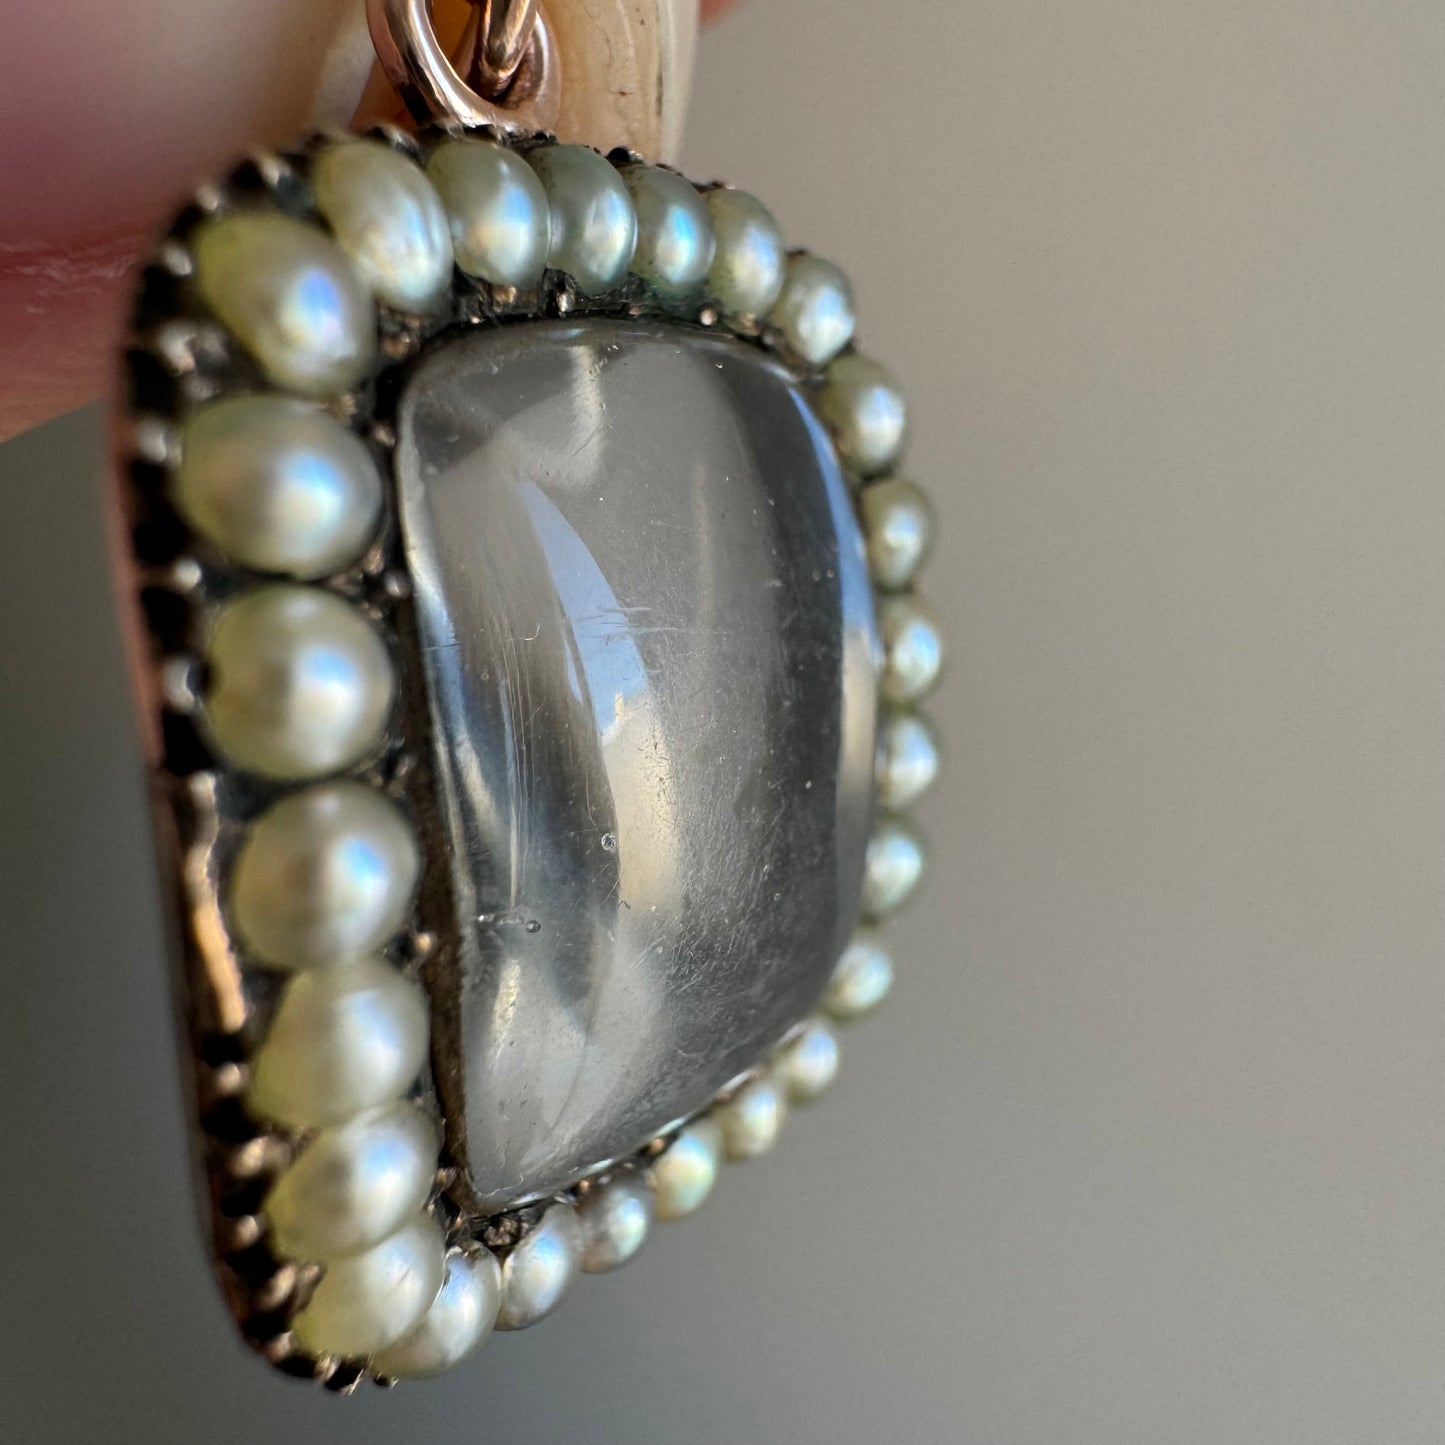 reimagined A N T I Q U E // timeless love / georgian 9k and pearl mourning locket / a conversion pendant